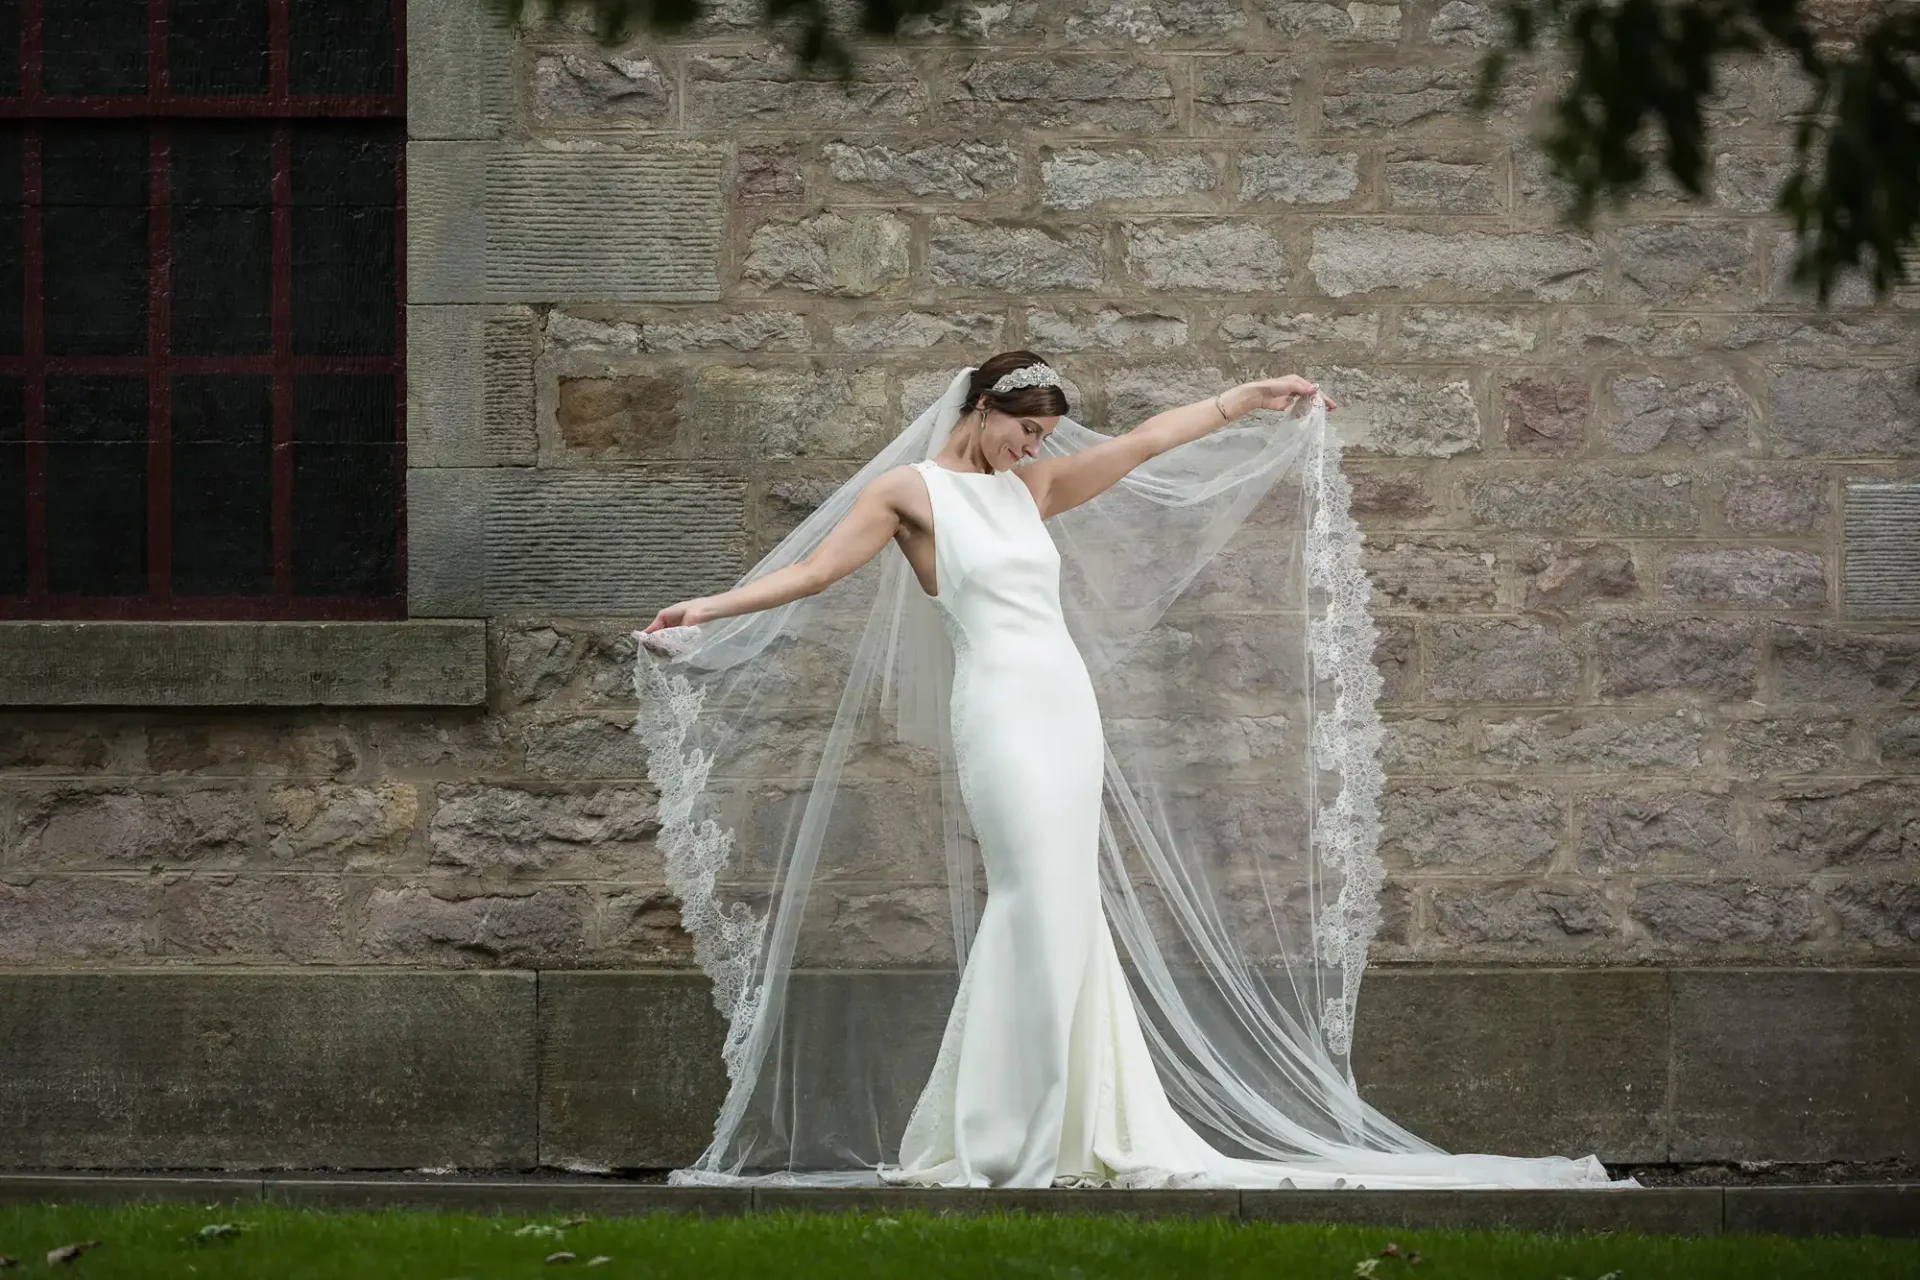 A bride in a sleeveless white wedding dress poses outside, holding out her lace-trimmed veil in front of a stone wall.